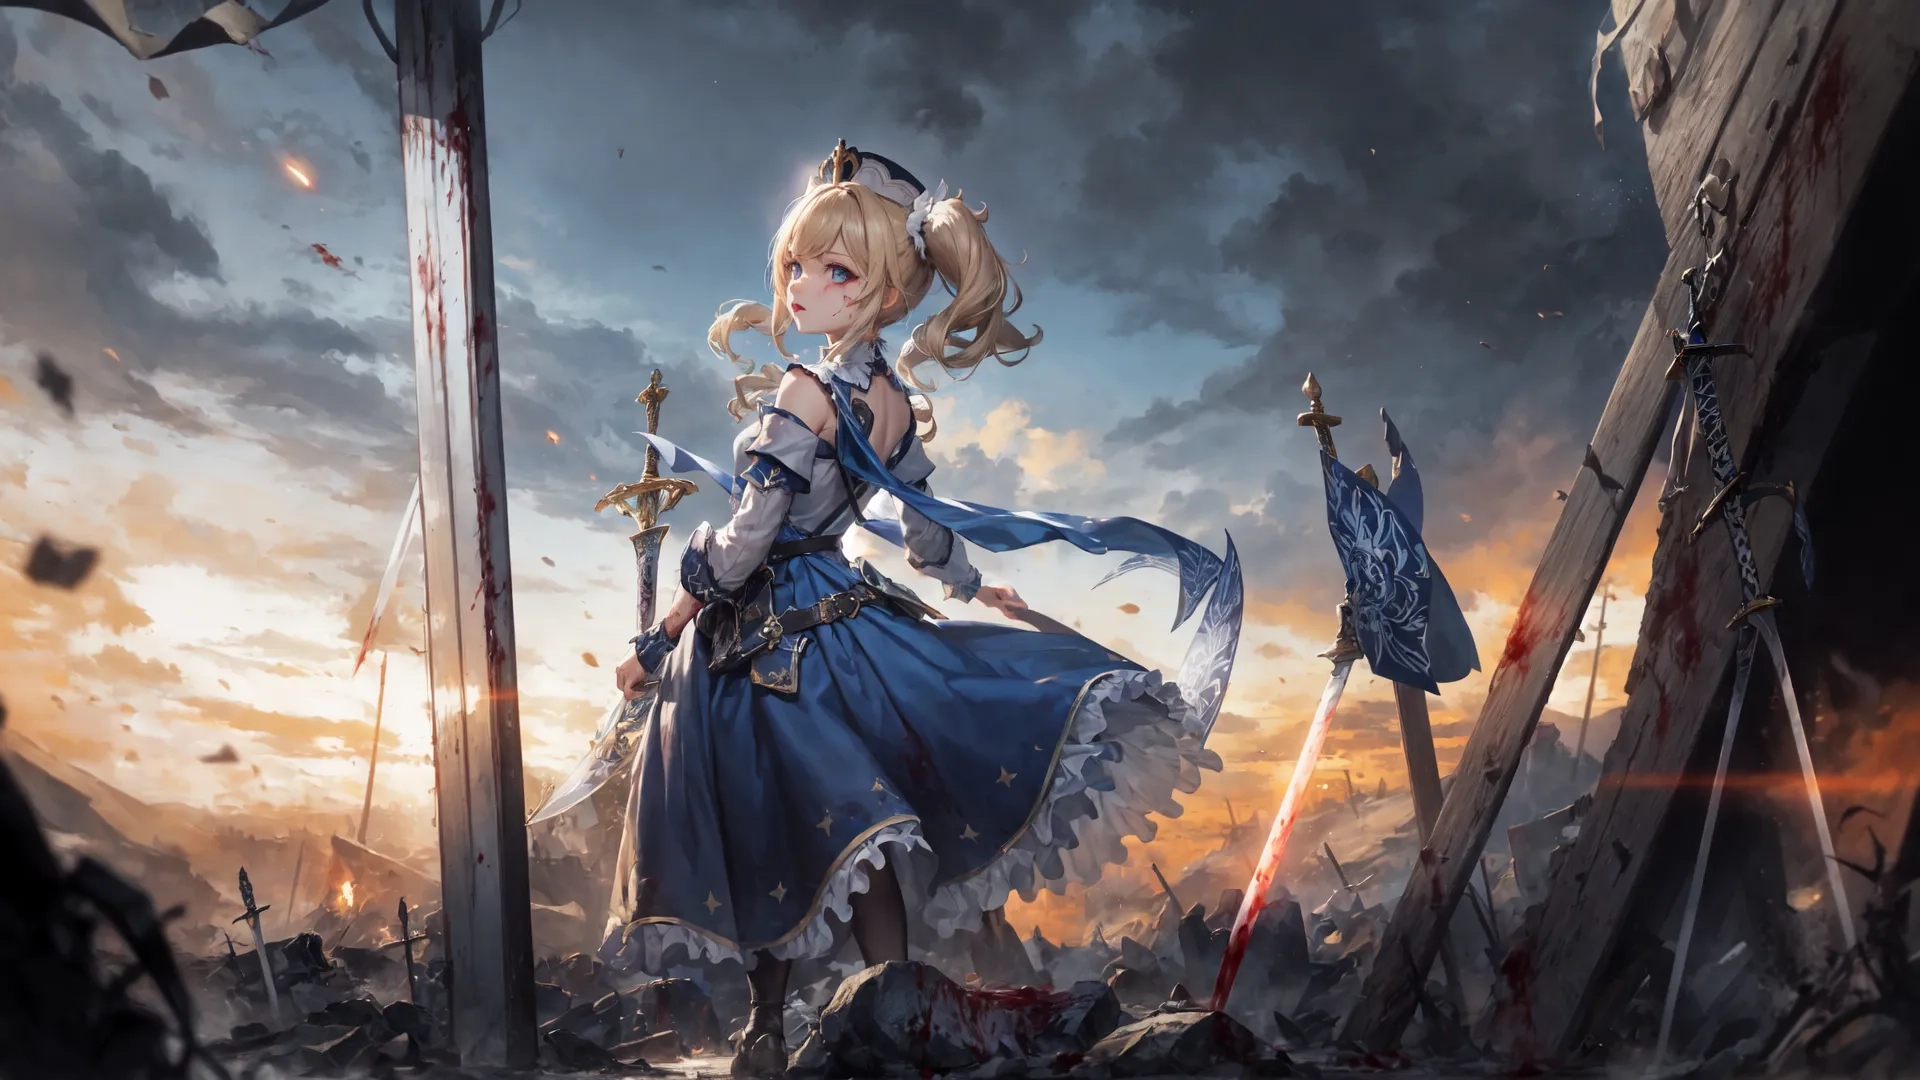 a anime style girl with long blonde hair holding a sword standing on a field of rubble, surrounded by flag's with birds around
